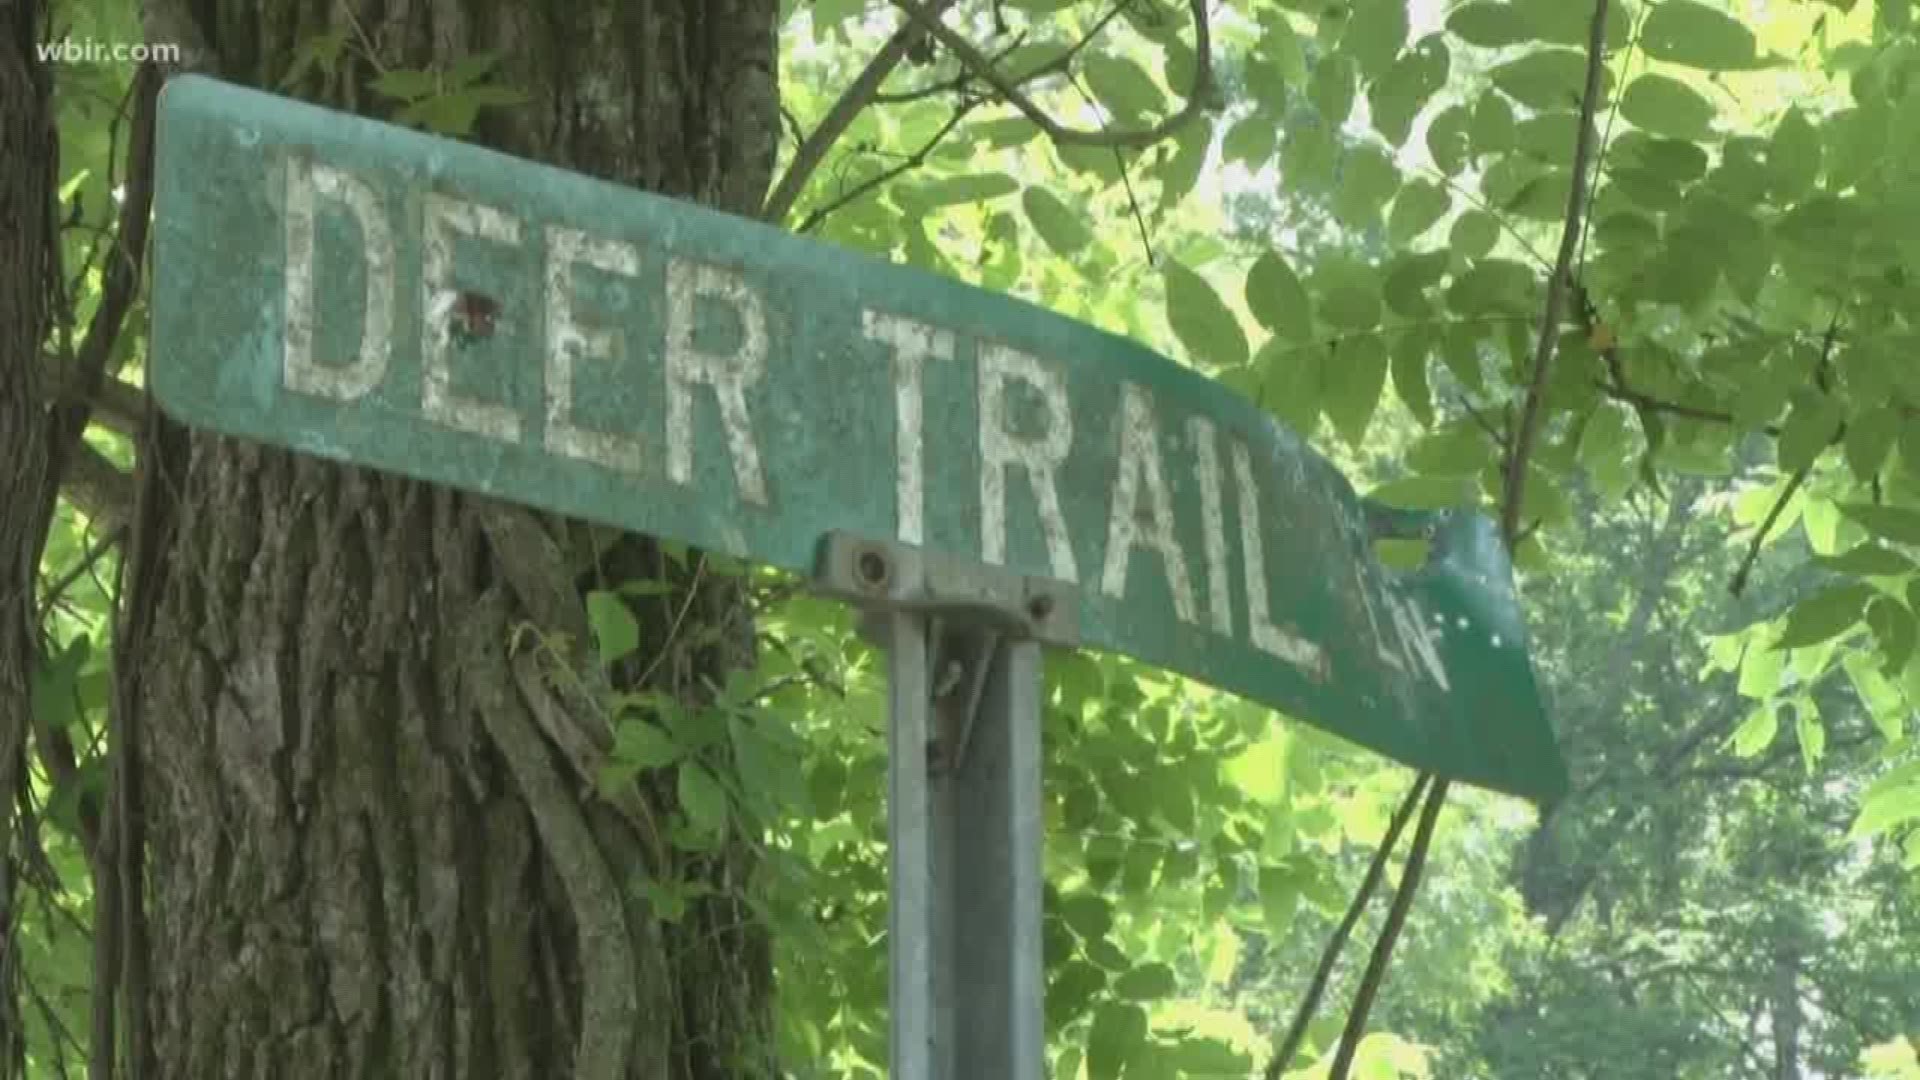 A Union County woman is begging for help to fix a road in Union County. Deer Trail Road in Sharps Chapel is so bad that it's unsafe for an ambulance to travel on it.